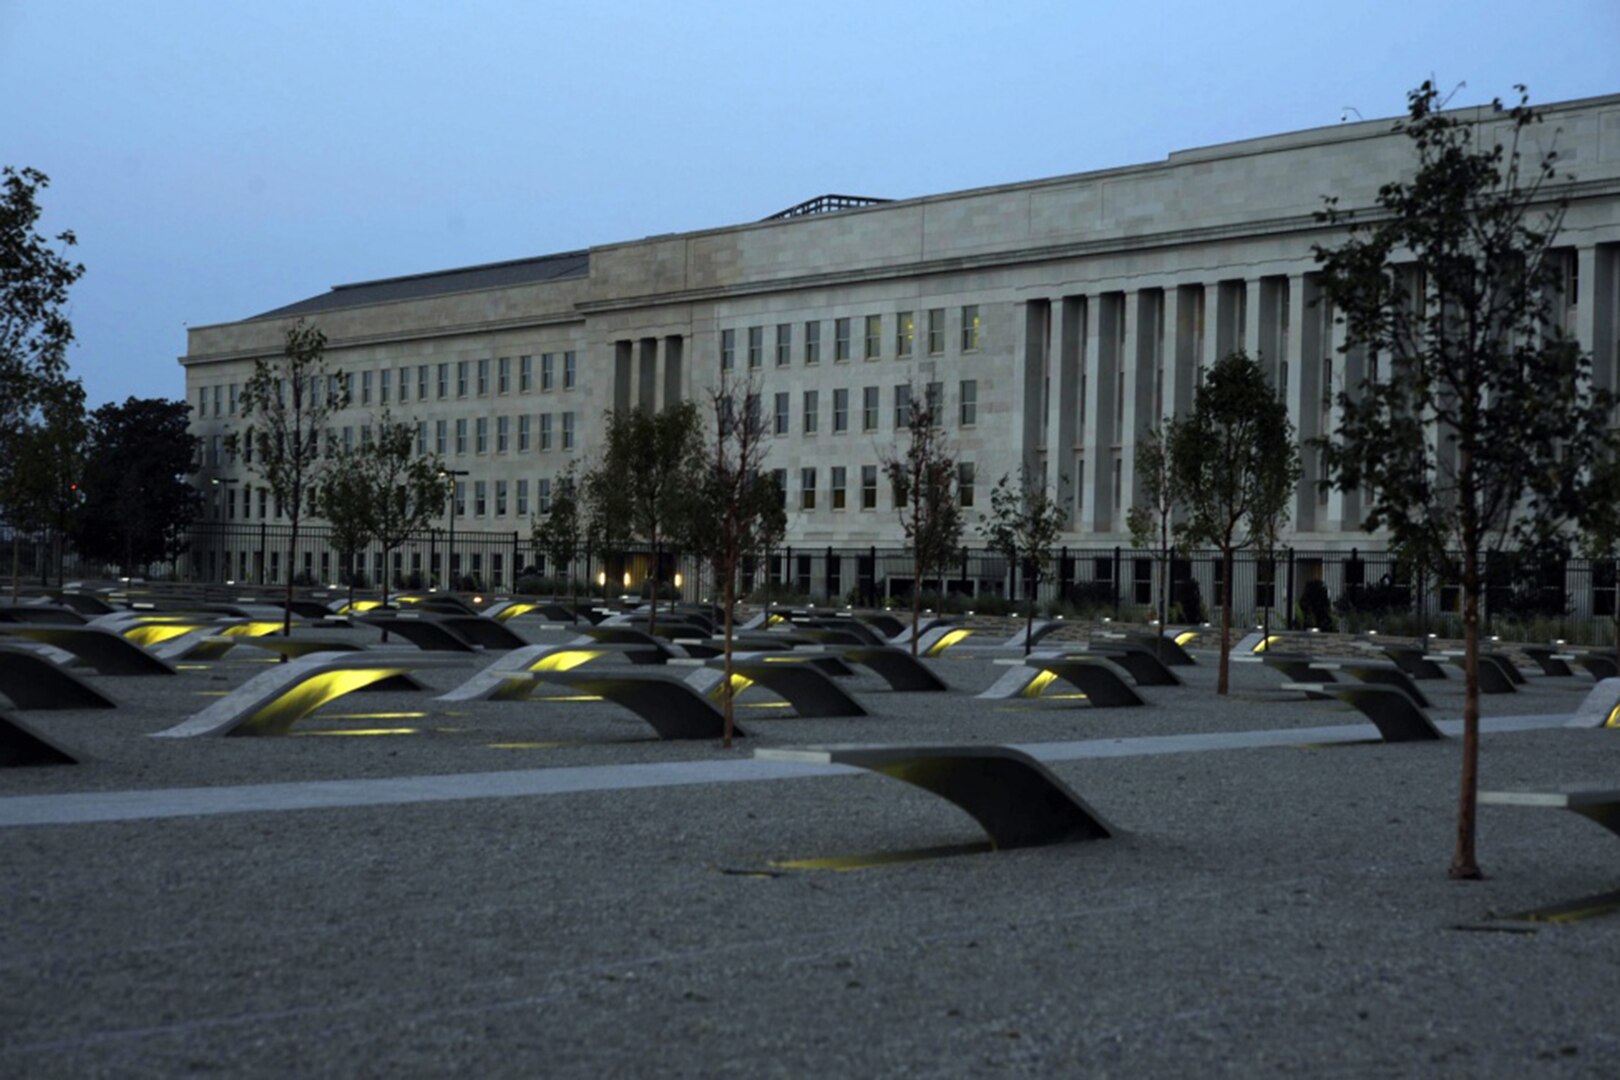 Dozens of small, curved structures rise from the ground in front of a large building.